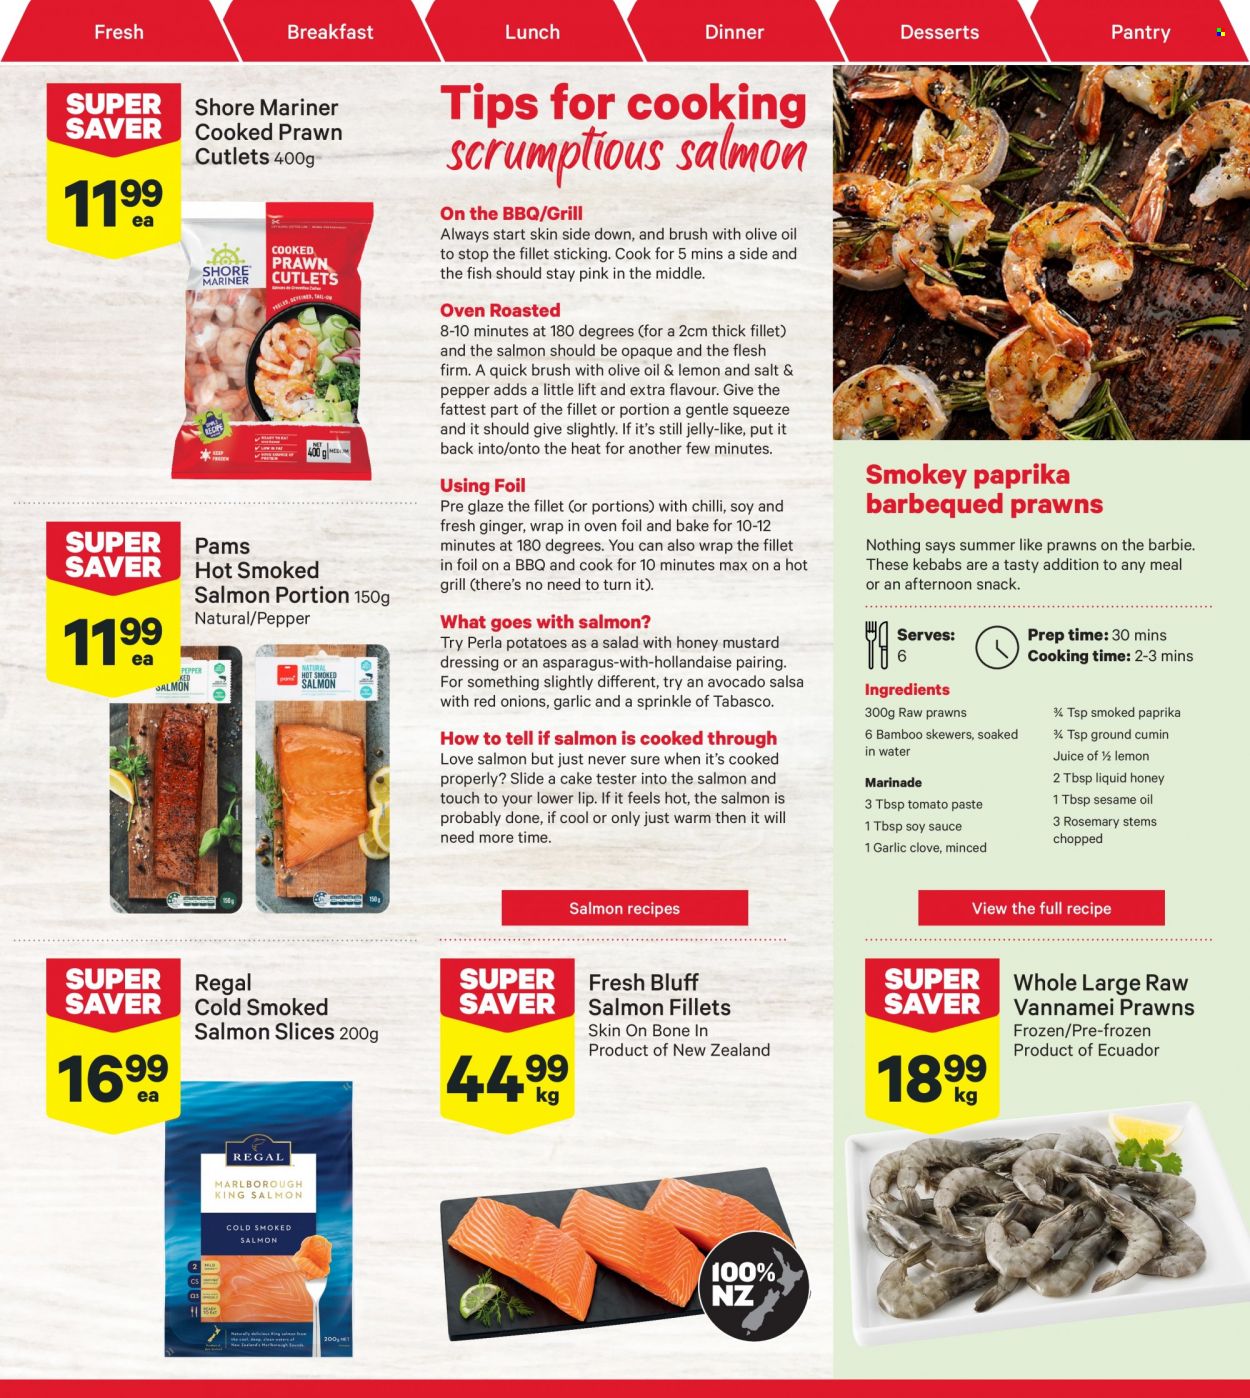 thumbnail - New World mailer - 30.01.2023 - 05.02.2023 - Sales products - cake, garlic, ginger, red onions, potatoes, avocado, salmon, salmon fillet, smoked salmon, prawns, fish, Shore Mariner, snack, jelly, tabasco, tomato paste, rosemary, cloves, cumin, mustard, soy sauce, honey mustard, dressing, salsa, marinade, sesame oil, oil, juice, Sure. Page 9.